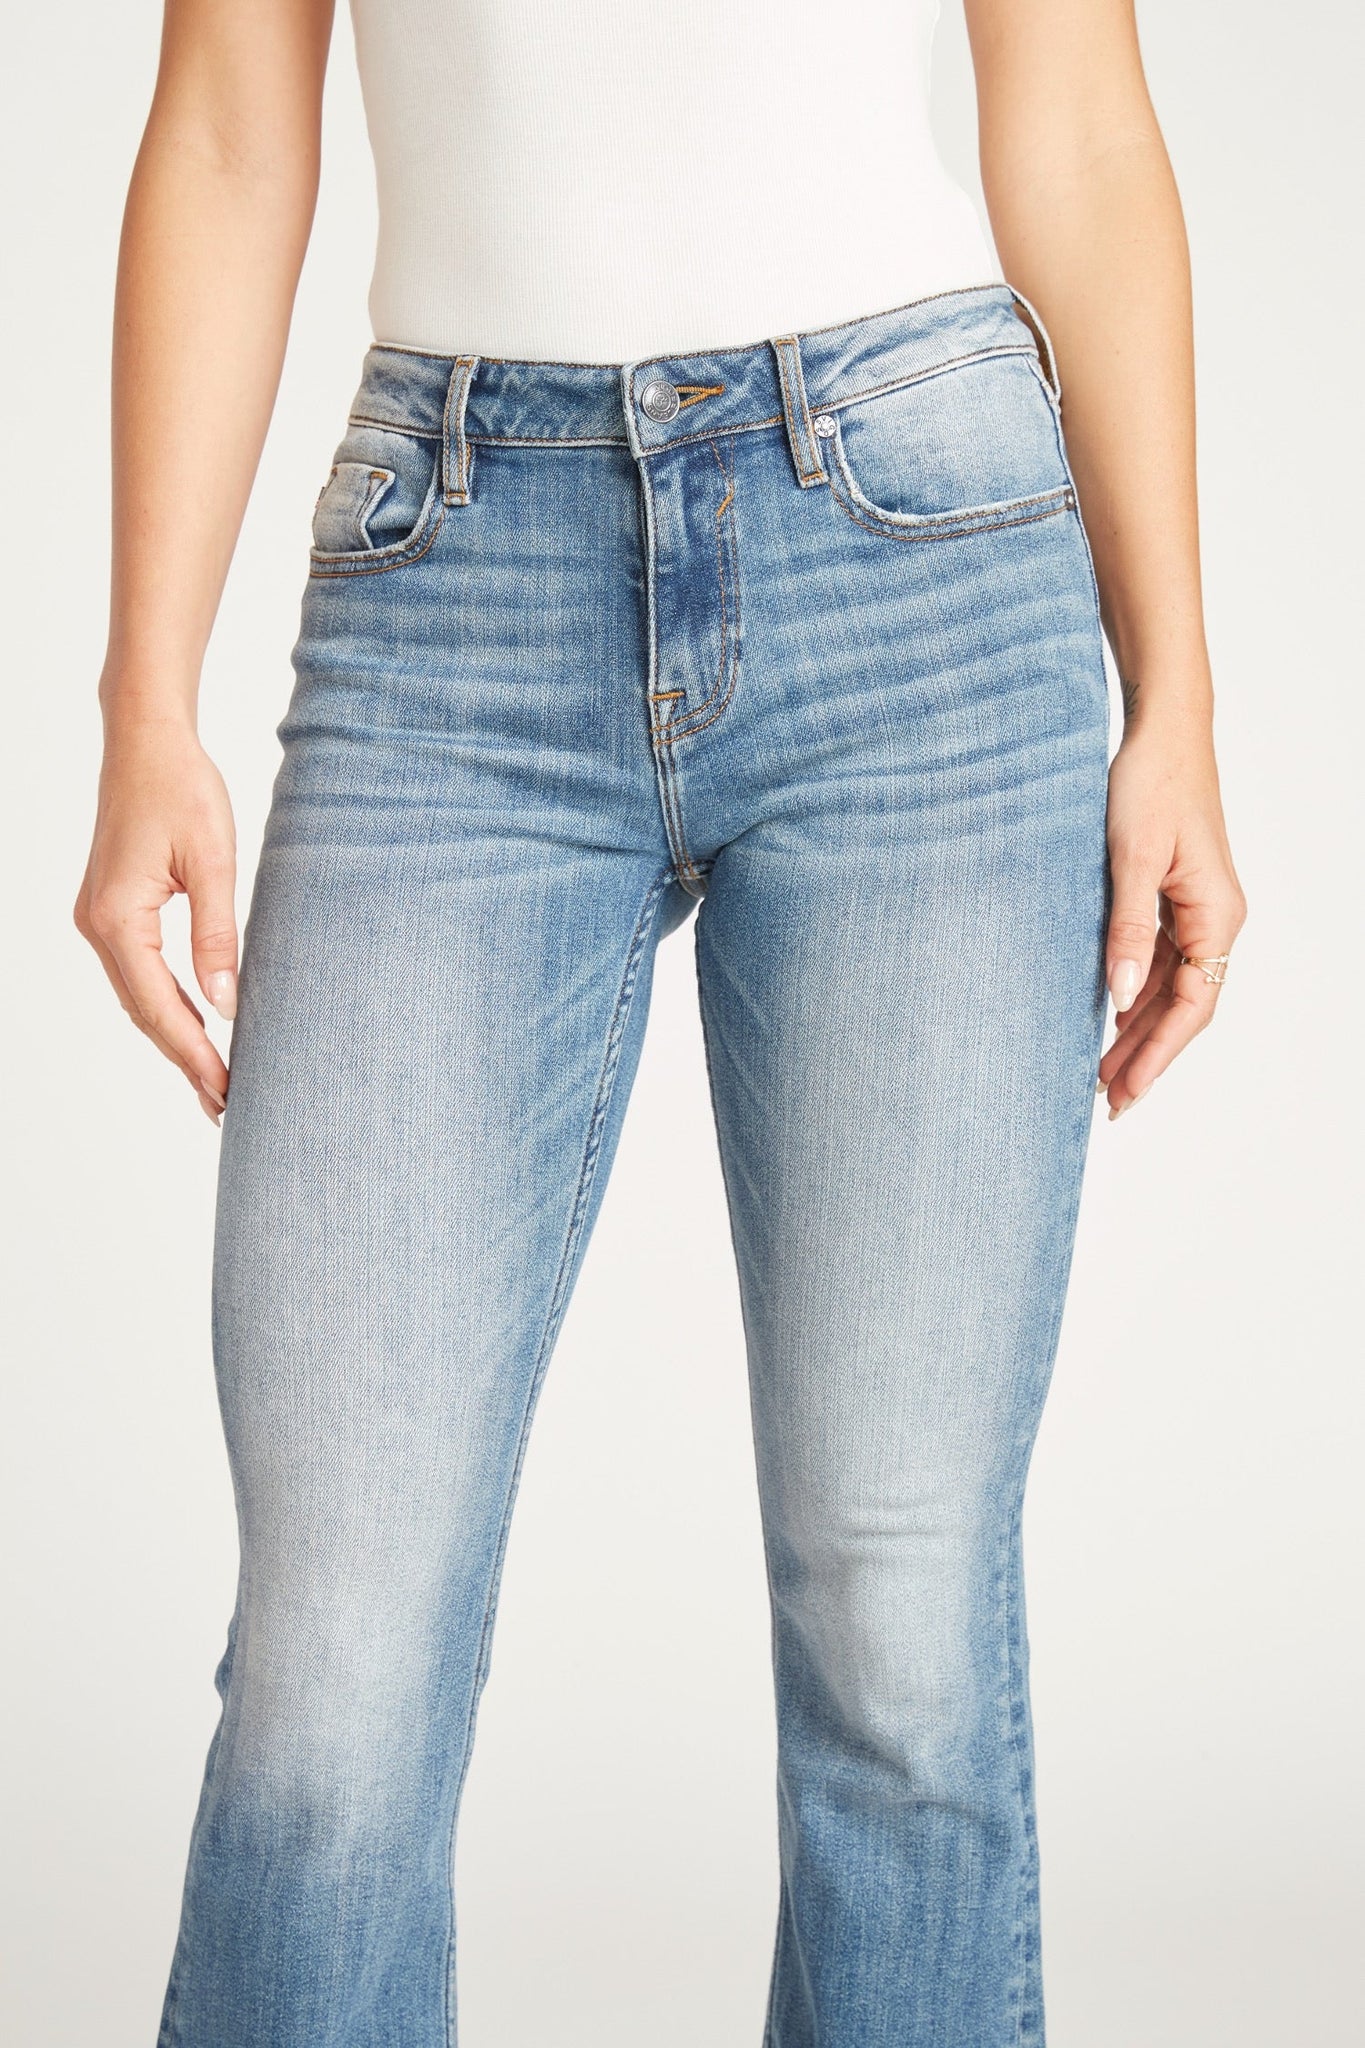 Load image into Gallery viewer, JAGGER BOOTCUT - MEDIUM WASH
